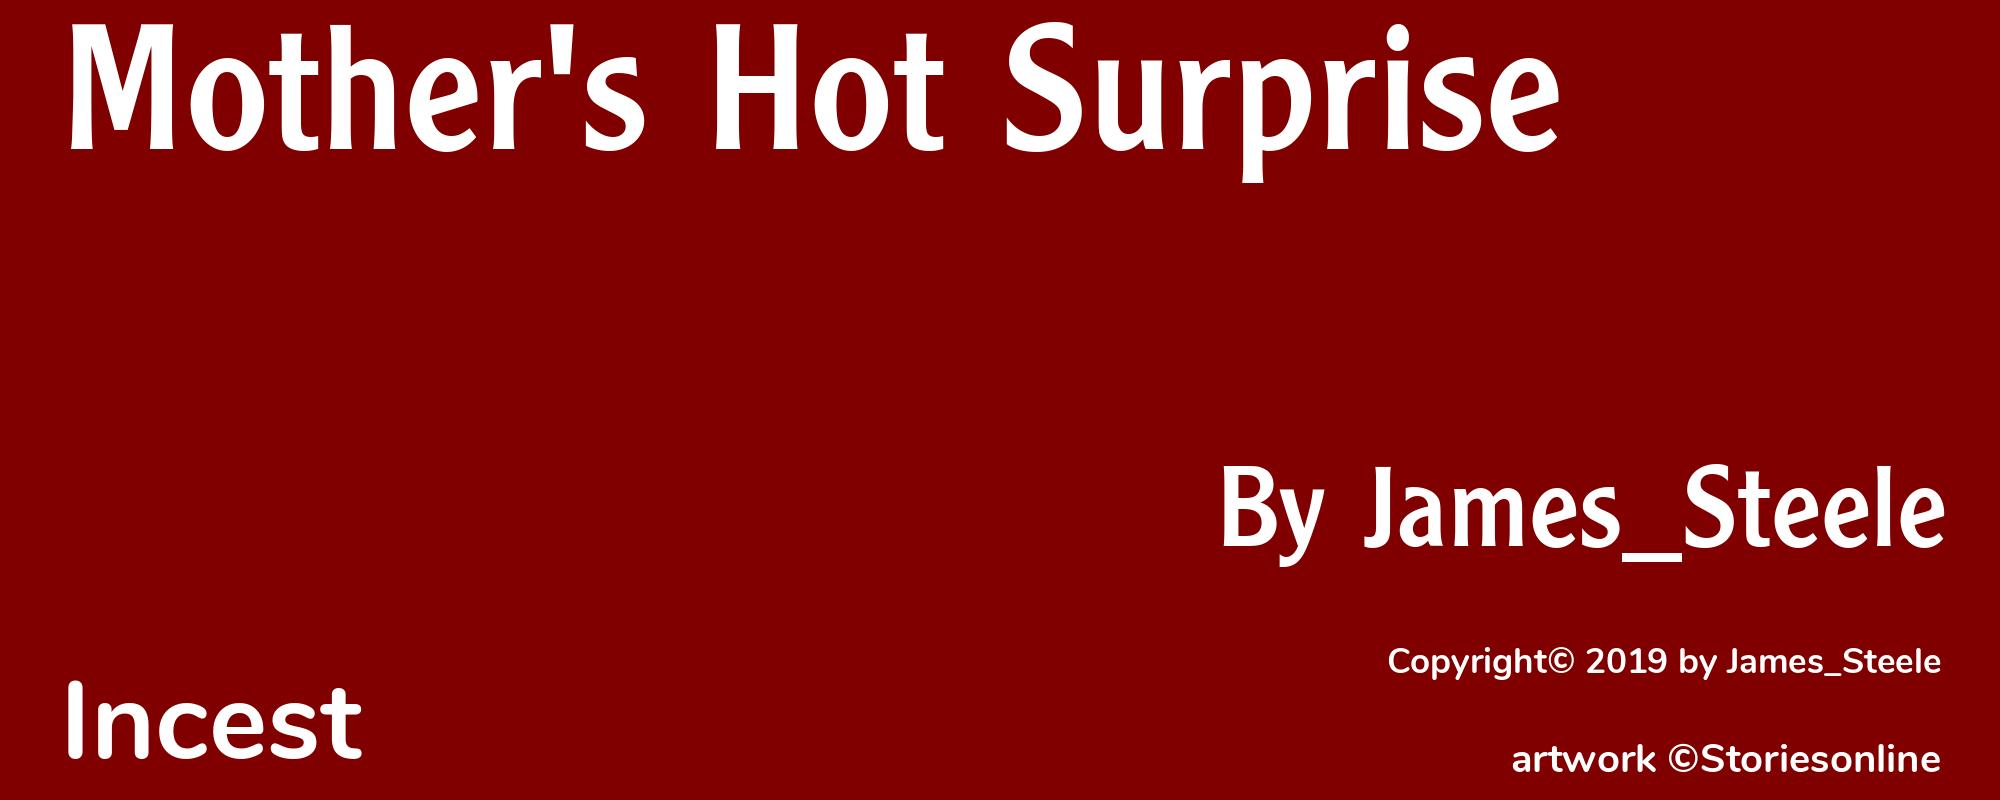 Mother's Hot Surprise - Cover